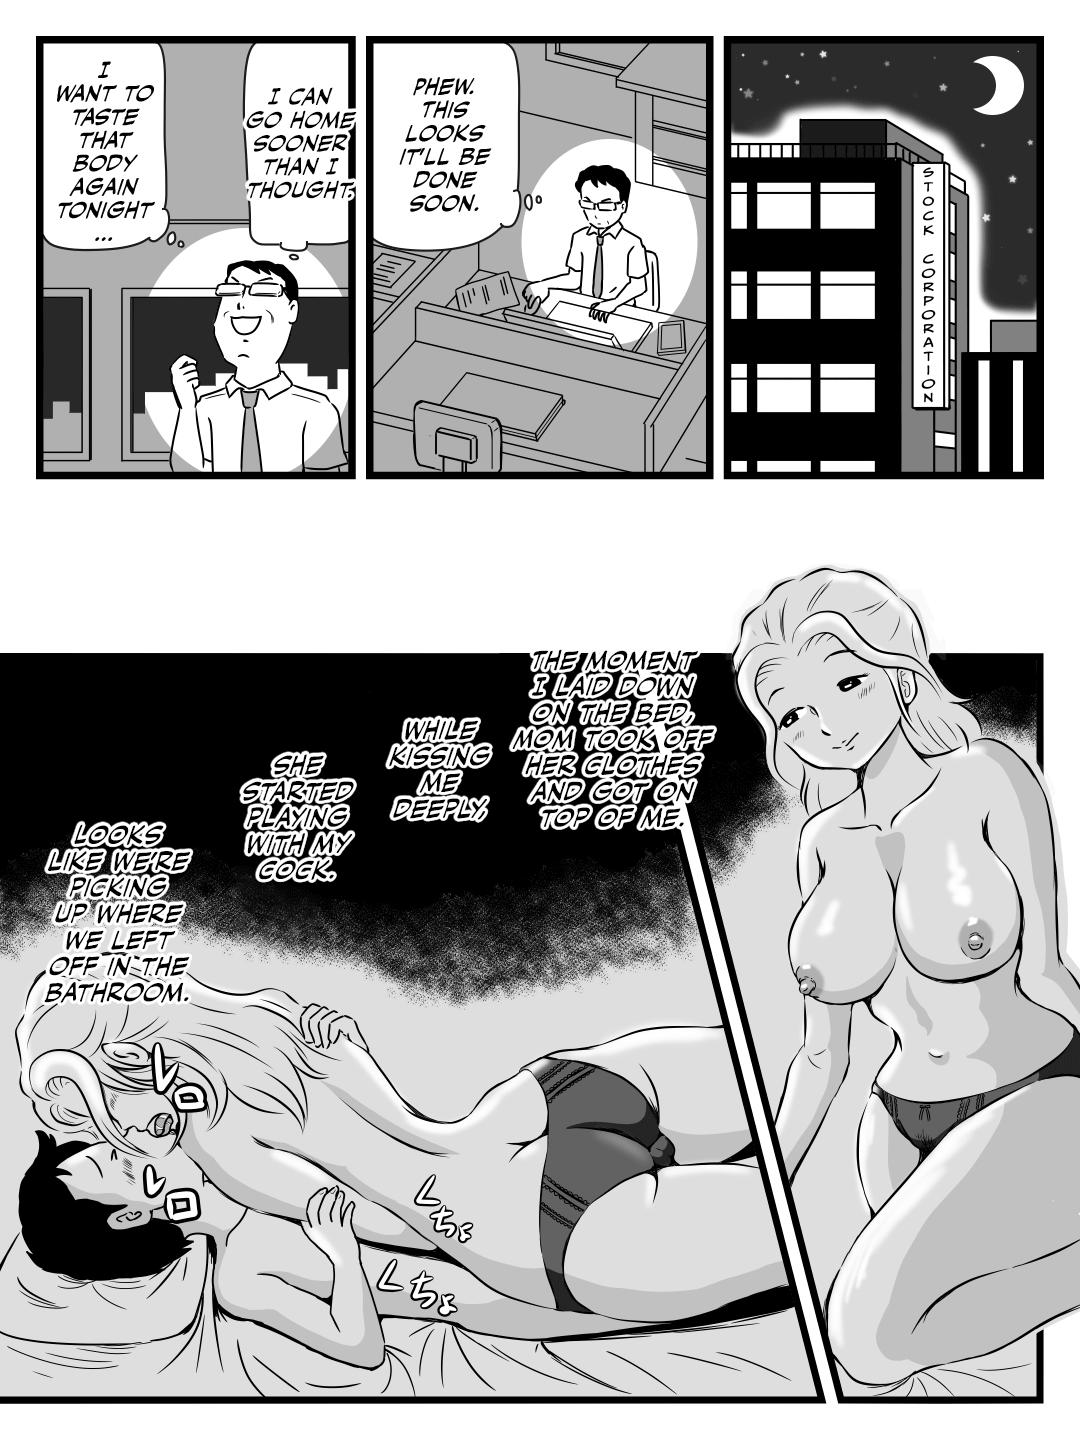 [Momoziri Hustle Dou] Demodori Kaa-san ga Eroku natte ita Ken | The Case Of A Mother Becoming Sexier After Moving Back In With Her Parents Post-Divorce [English] [CulturedCommissions] 27